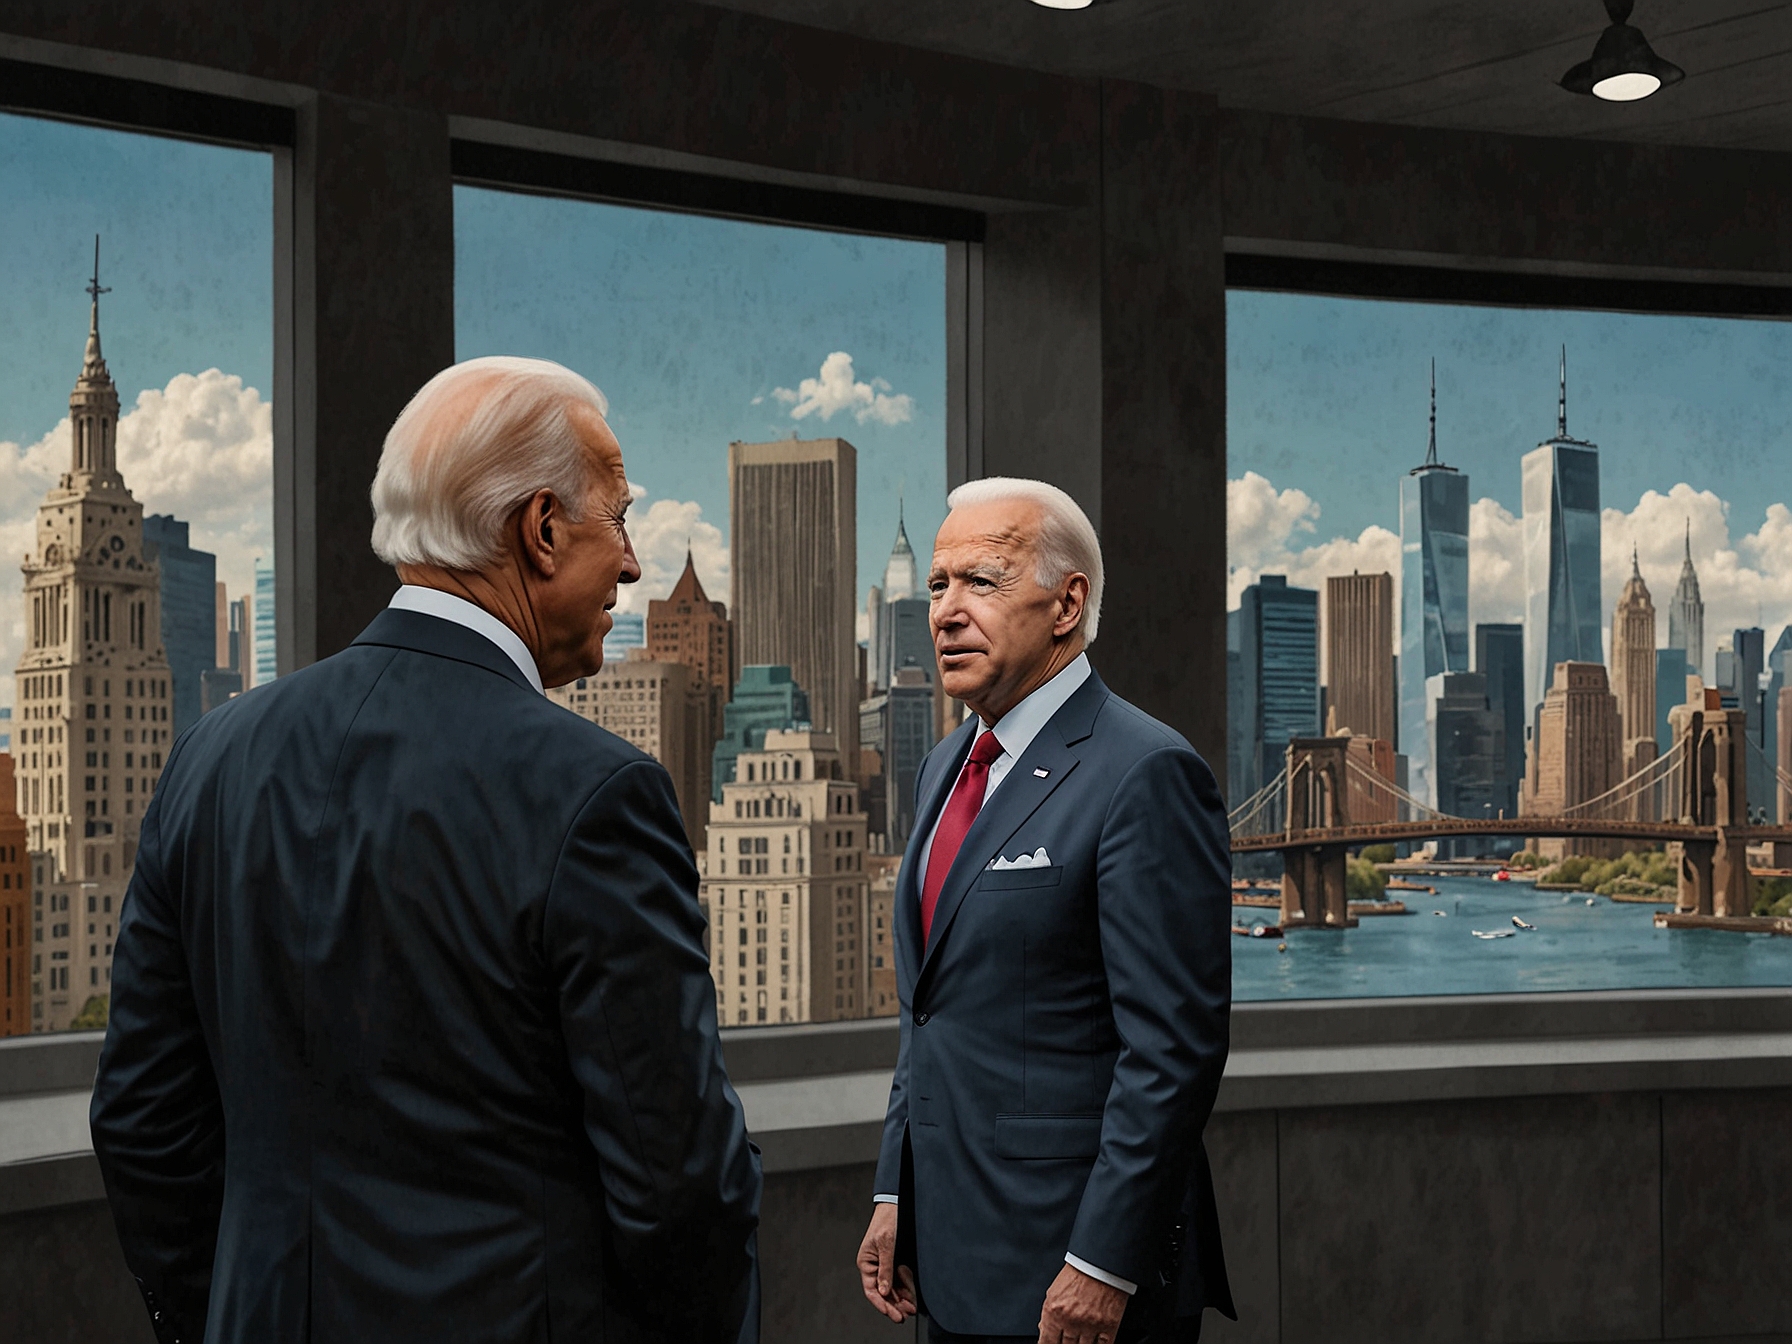 An illustration of President Biden and former President Trump in a split-screen with the backdrop of the New York skyline, highlighting their competitive stance in the poll results.